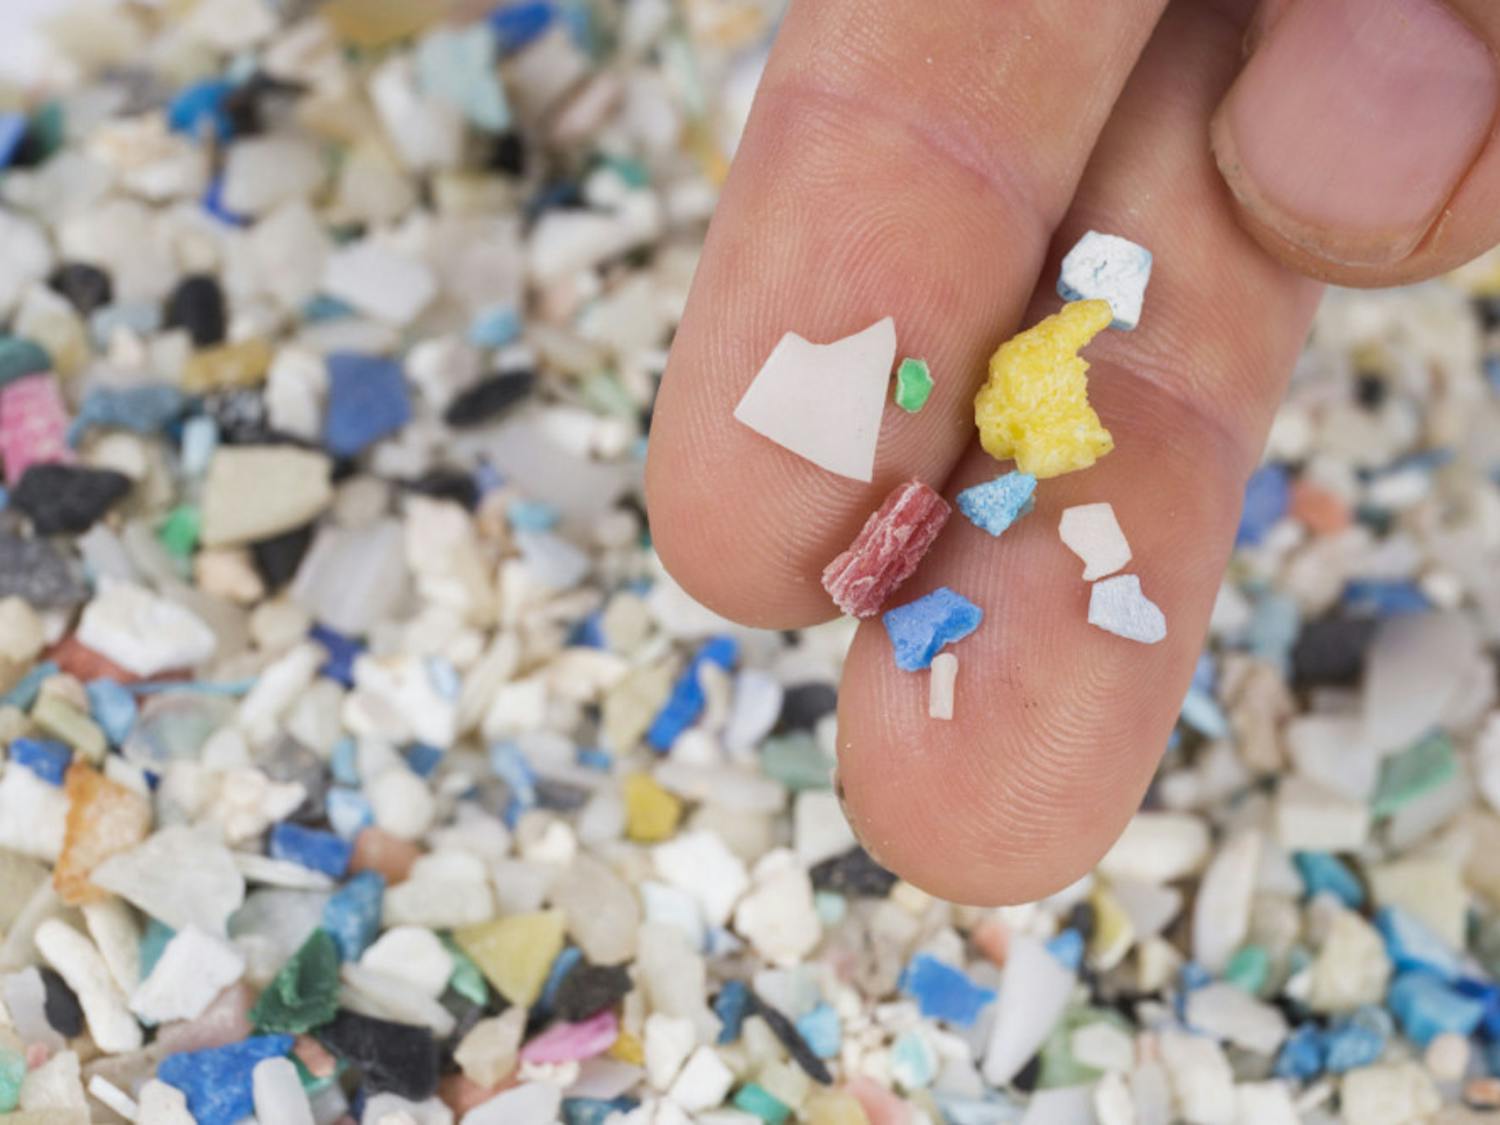 A pile of microplastic collected by The Florida Microplastic Awareness Project. Plastics like these are among the top ocean pollutants, according to Savanna Barry, a Cedar Key volunteer coordinator with the project.&nbsp;
&nbsp;